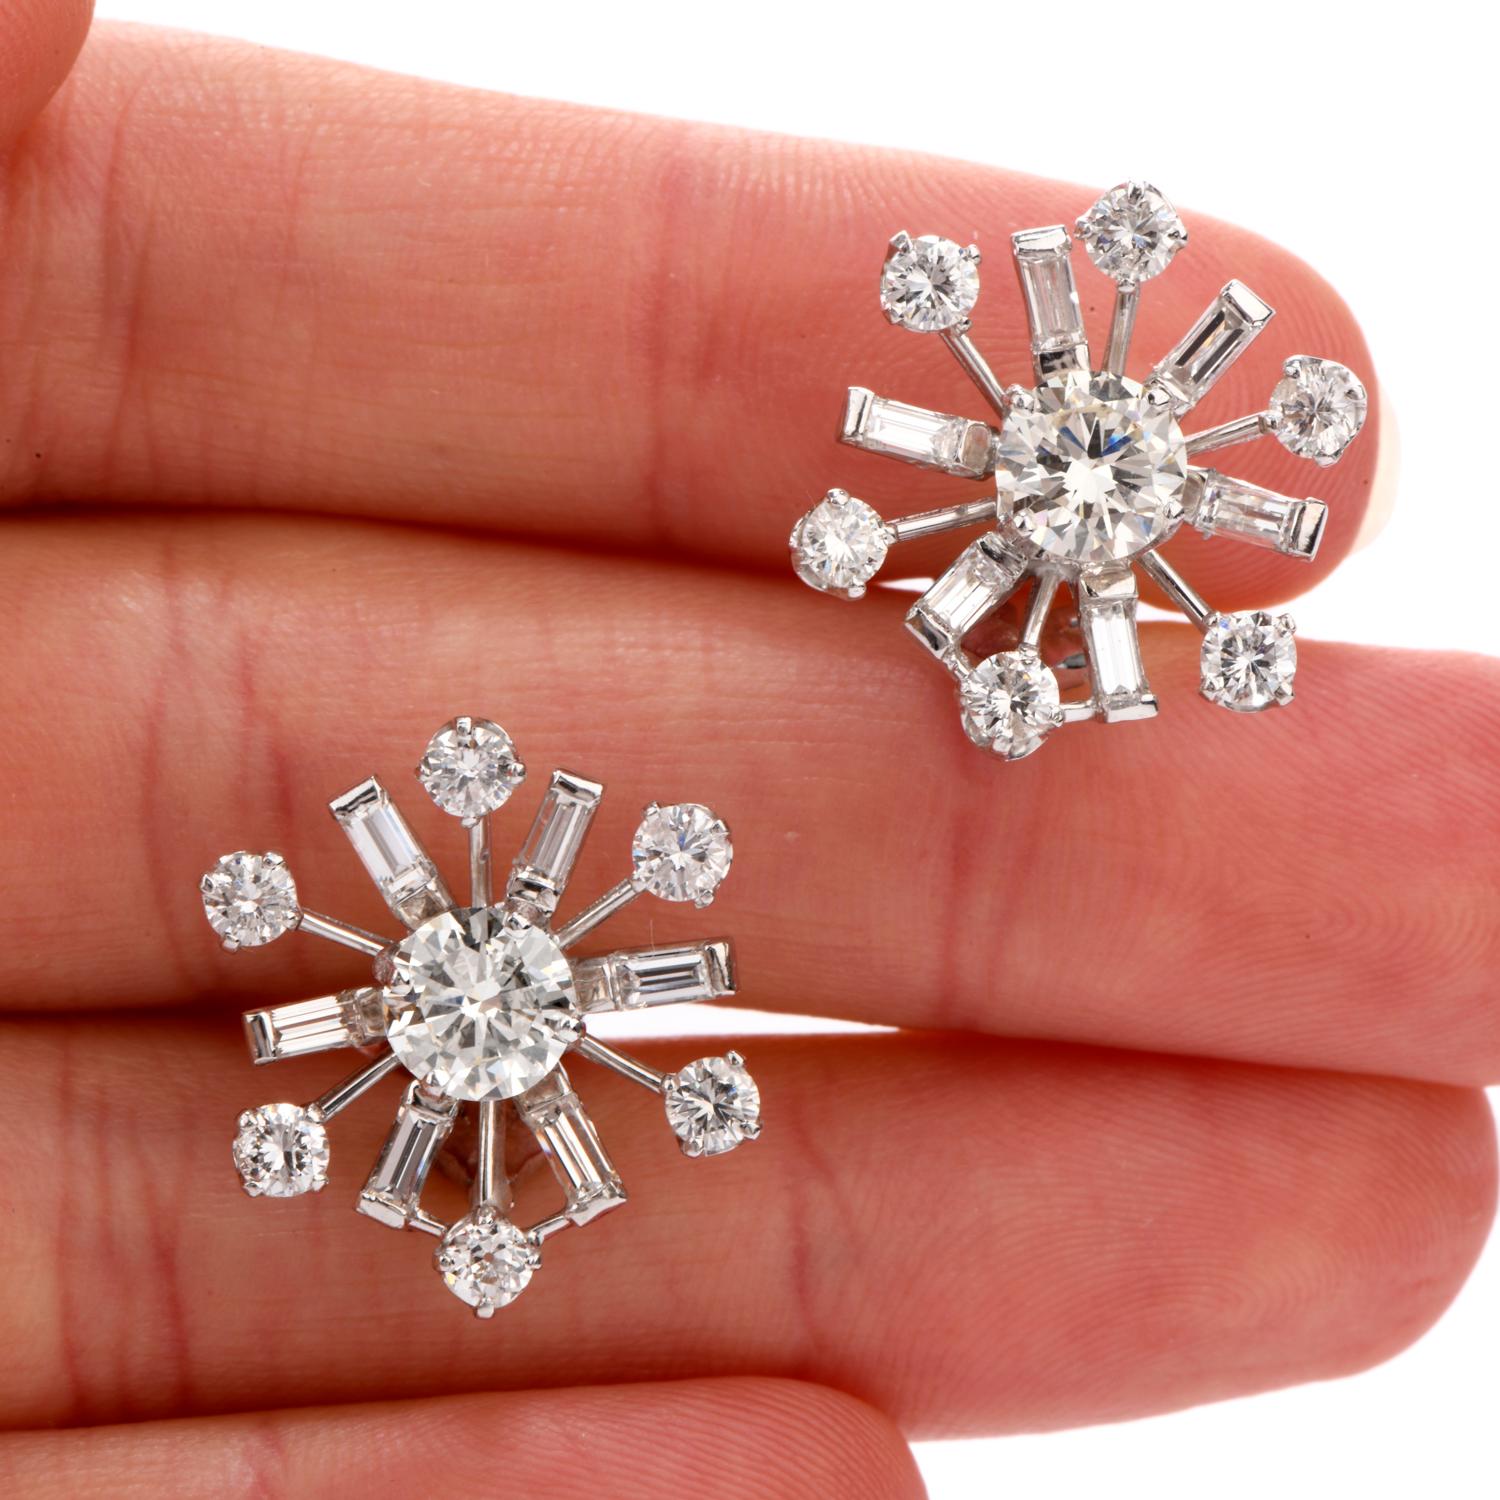 Fiery white round and baguette cut Diamonds adorn this vintage 1960's  Pinwheel motif earrings.  Crafted in platinum, they measure appx. 20.24 mm.

Featured prominently in the center of Each is 1 round brilliant cut

diamond weighing approx. 1.90